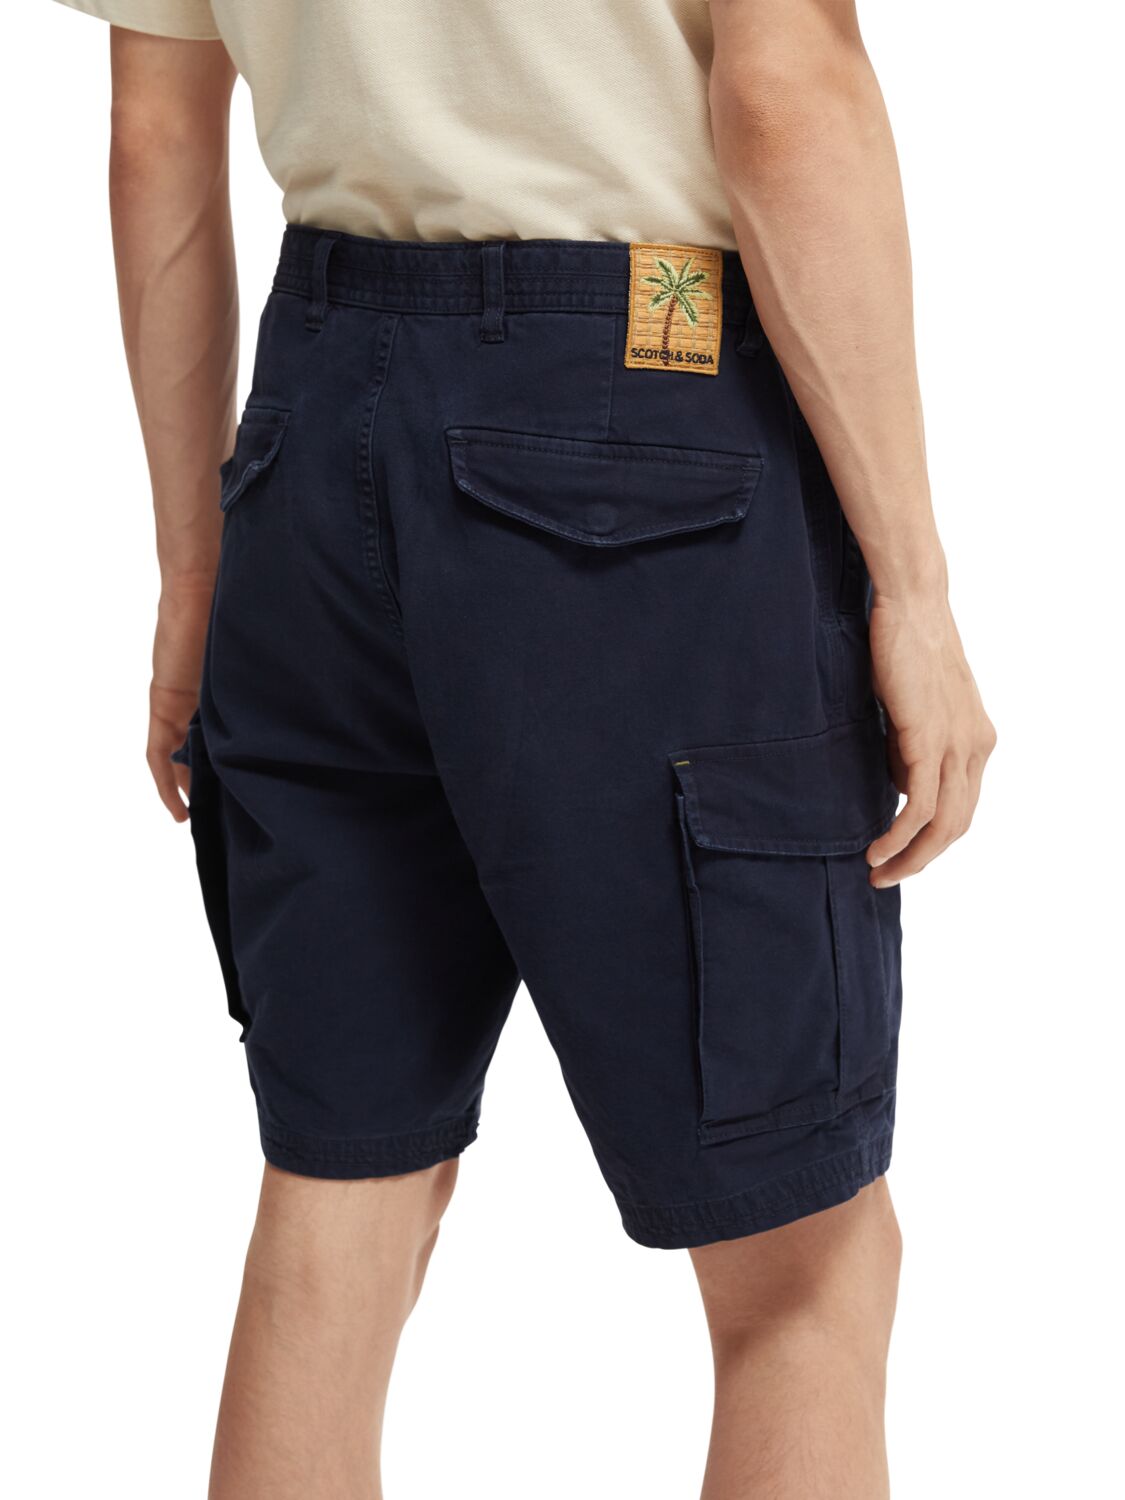 Scotch and Soda Fave Garment Dyed Cargo Shorts - Night